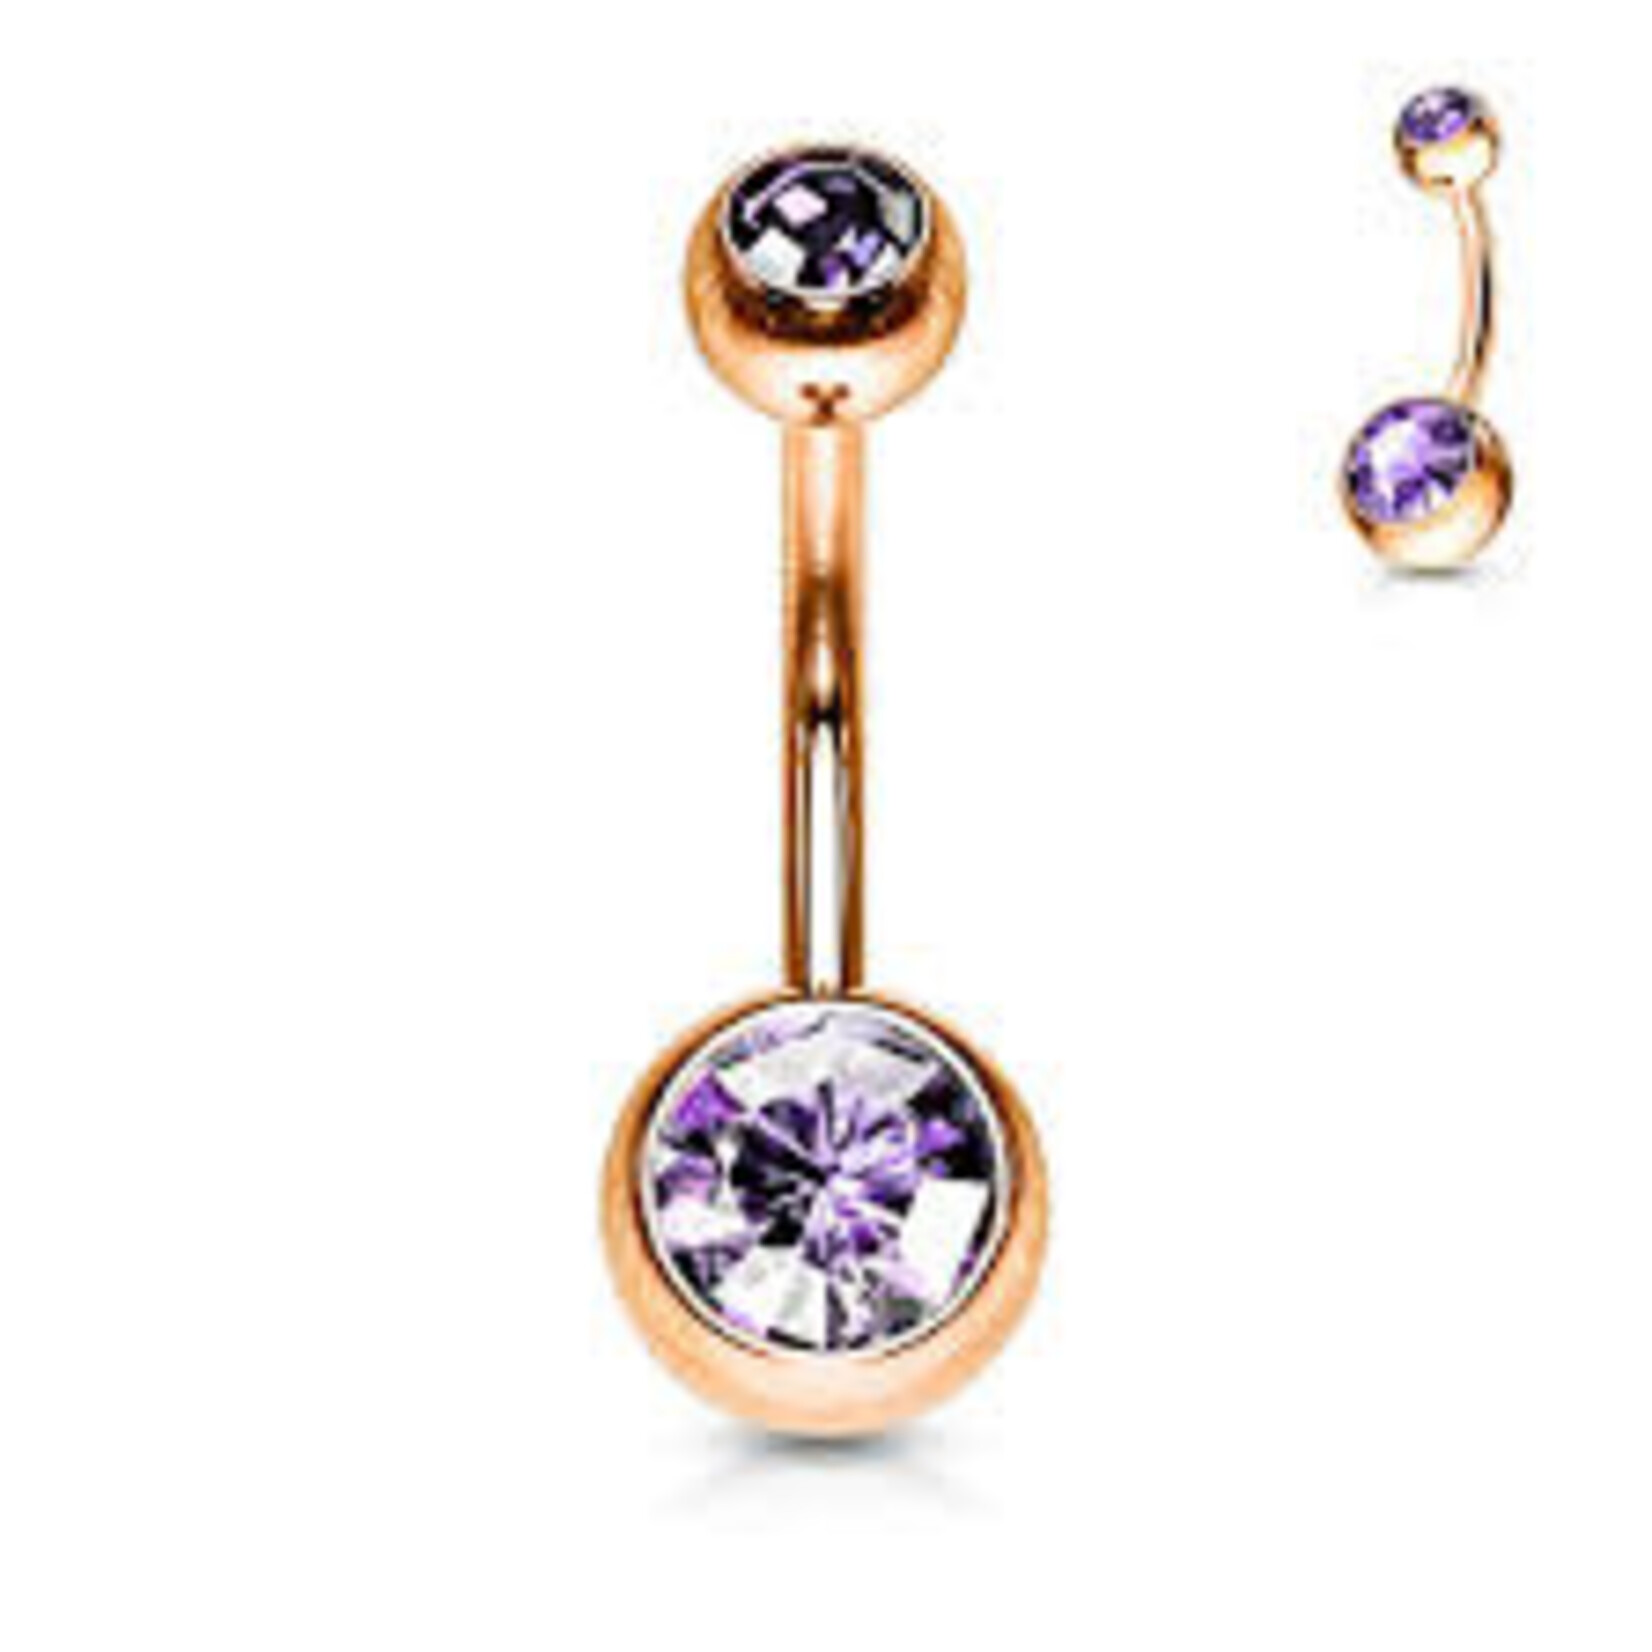 Hollywood Body Jewelry Rose Gold w/Gems Navel Ring